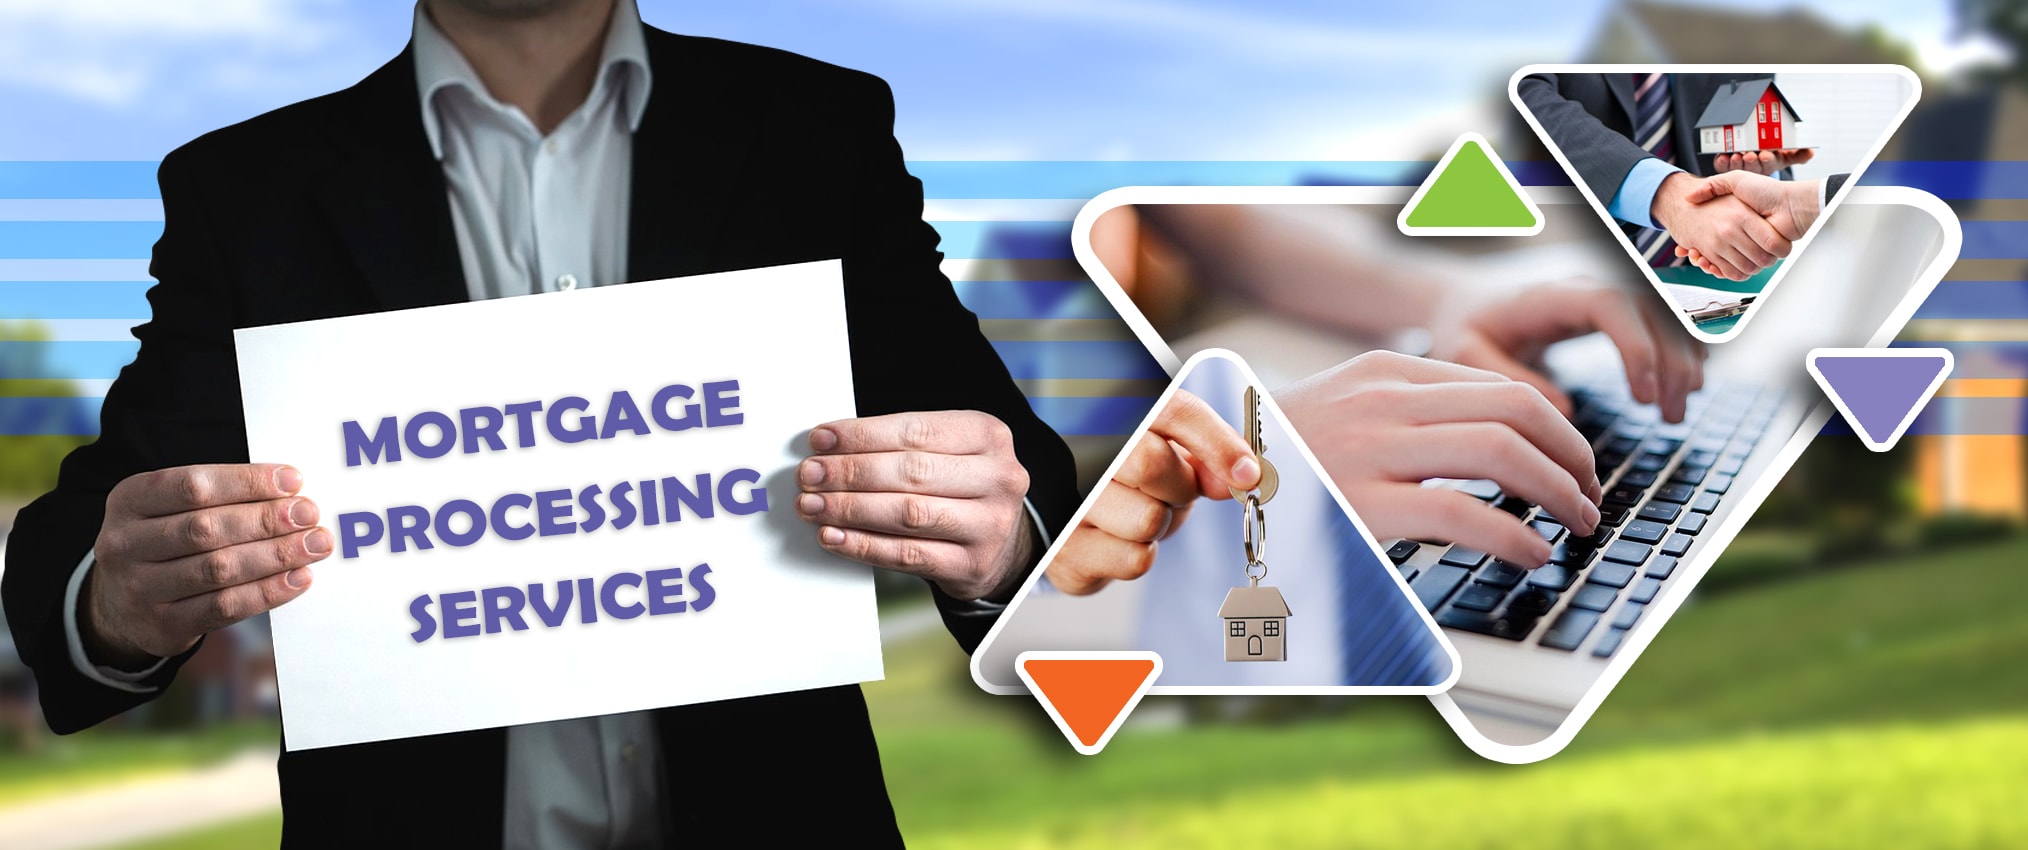 5-biggest-challenges-in-mortgage-processing